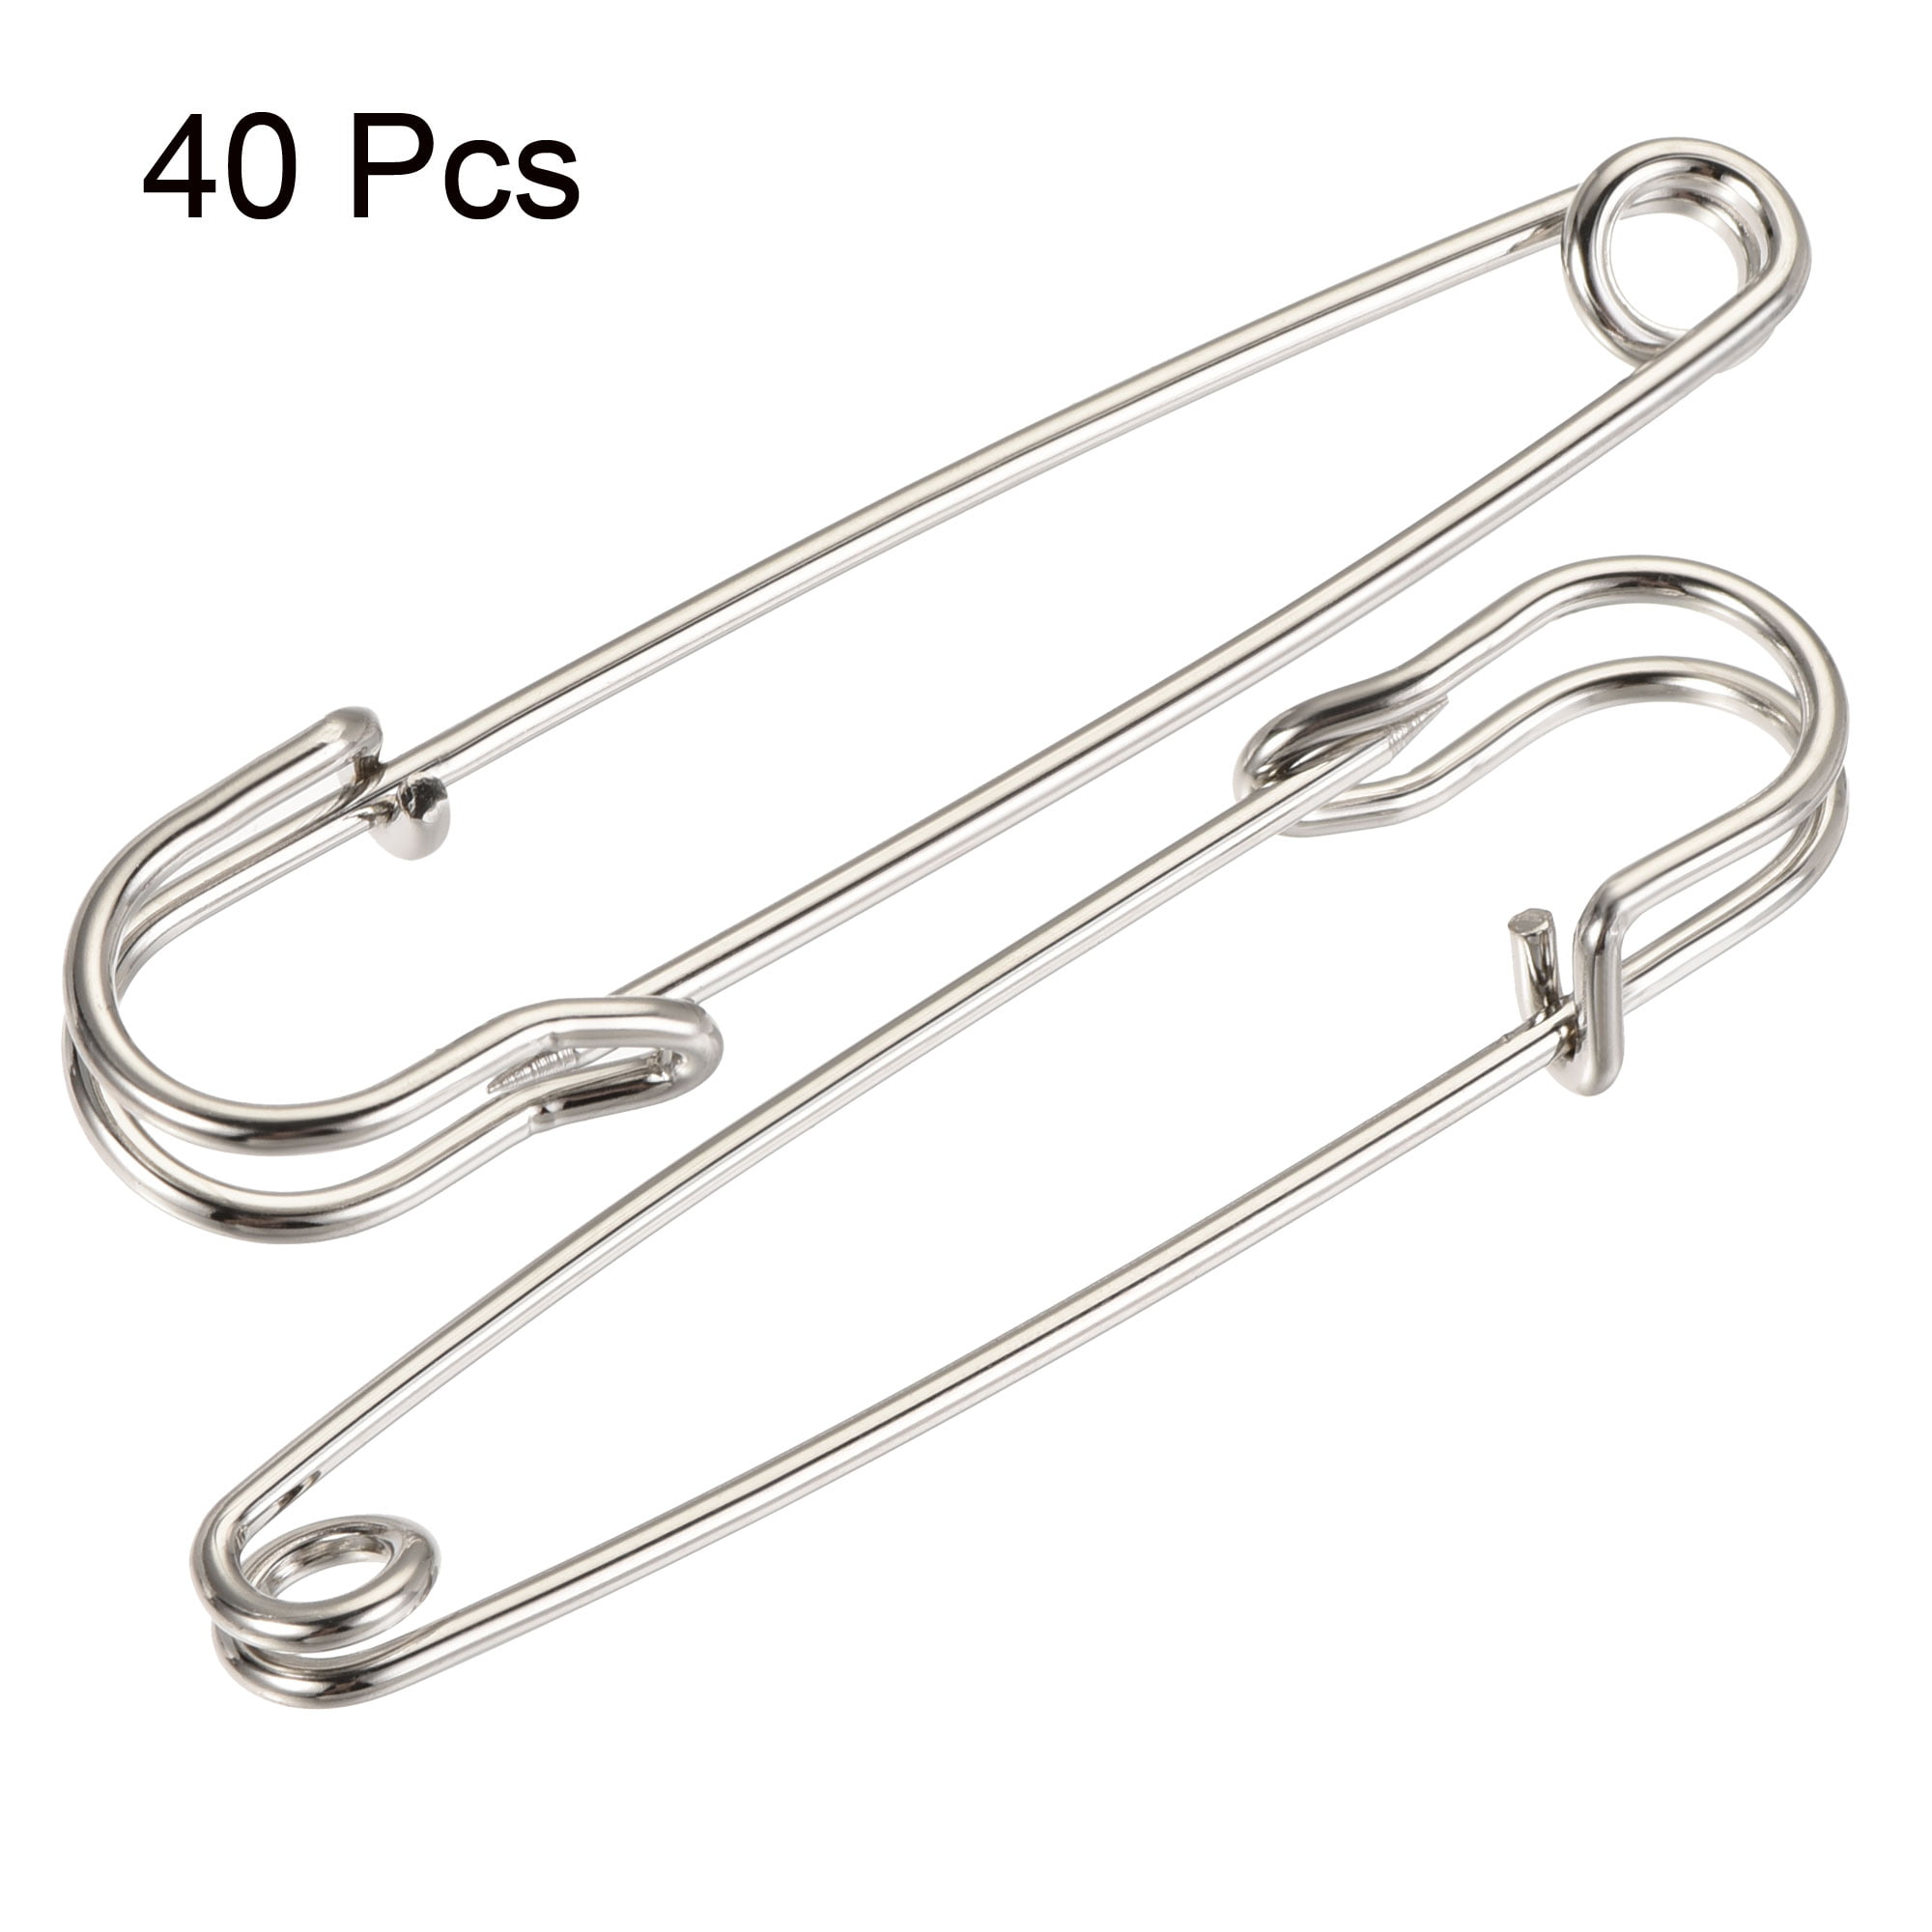 Uxcell 54mm/2.13 Inch Metal Safety Pins Sewing Pins for Office Home Silver  Tone 500 Pack 